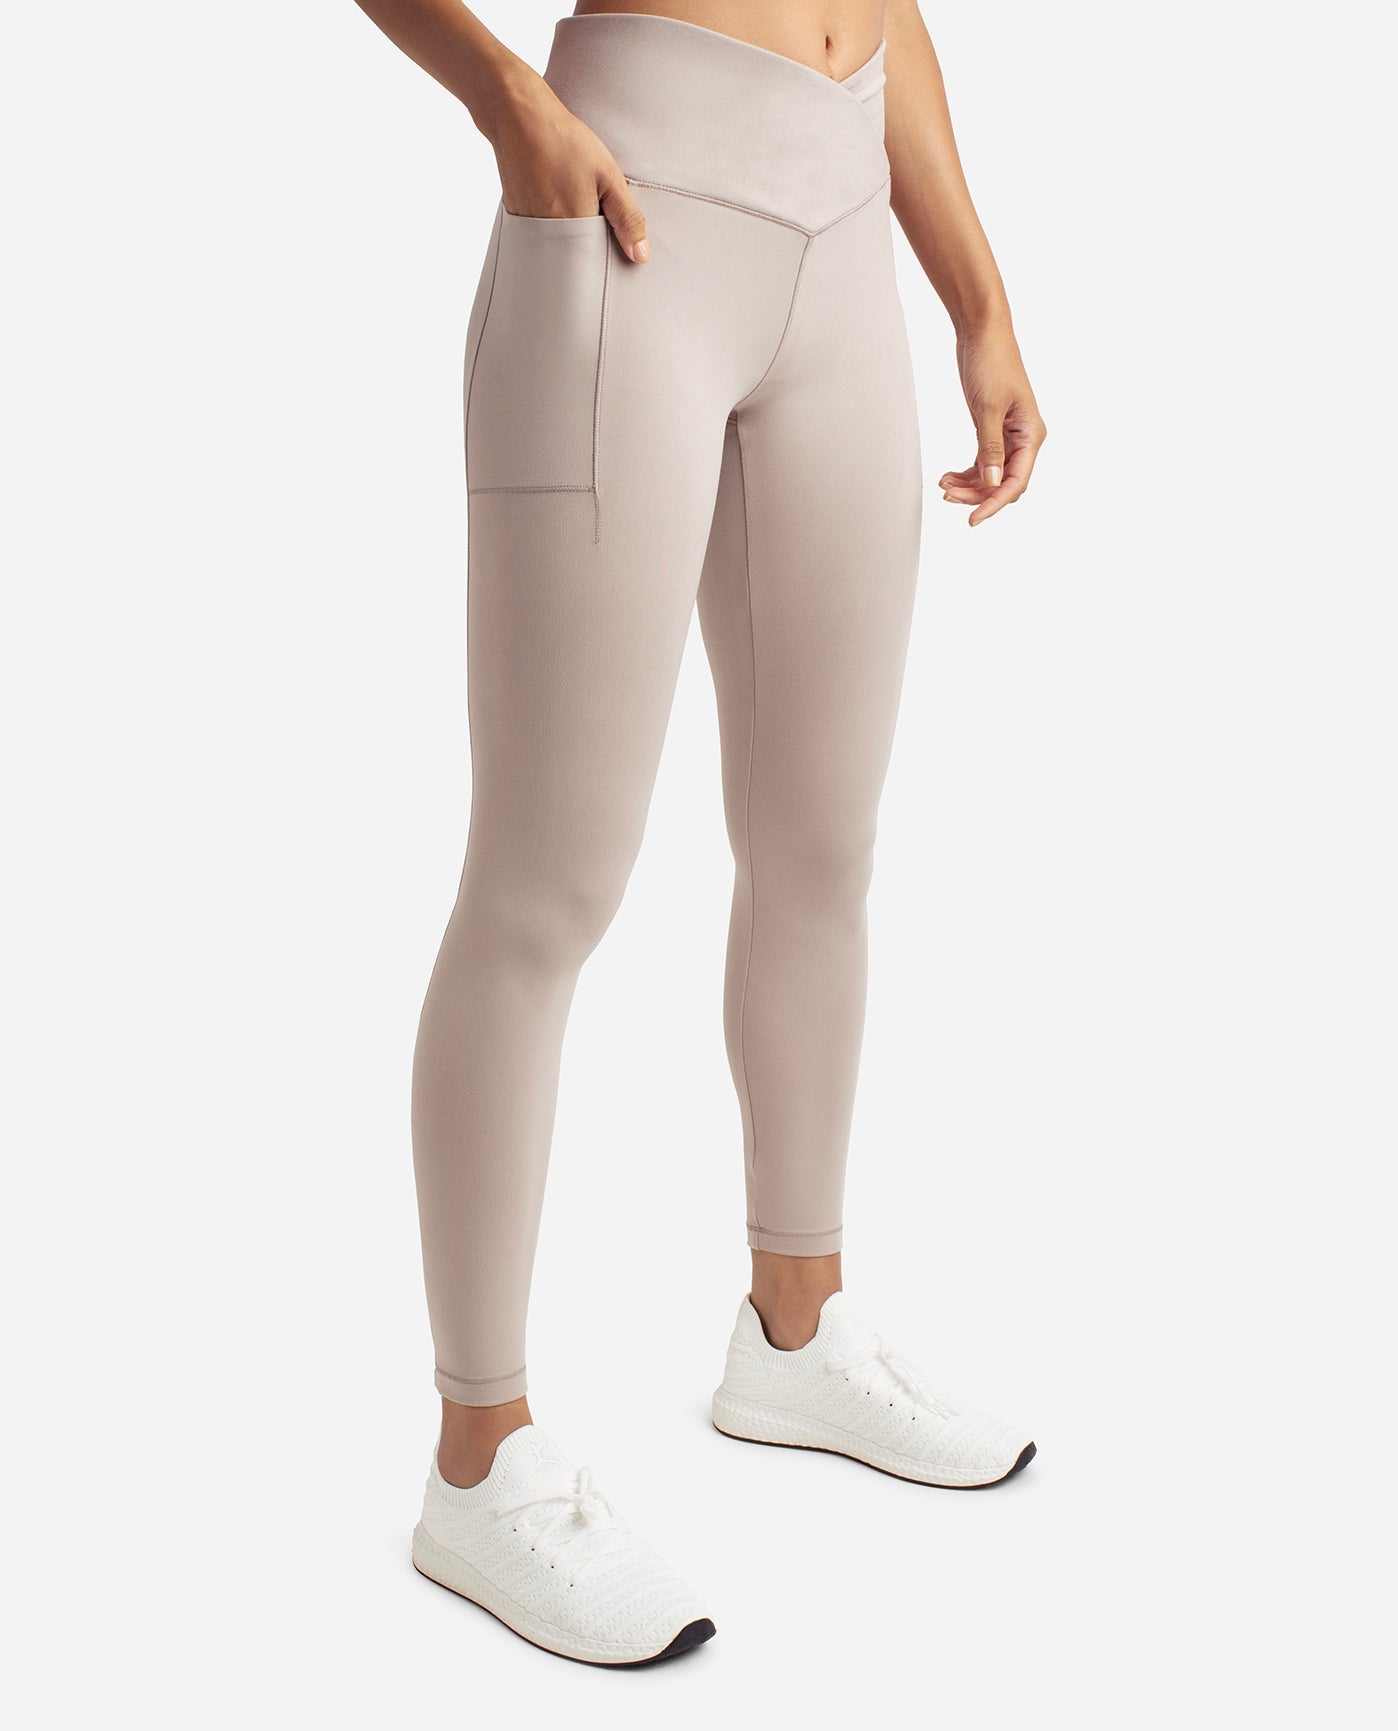 leggings cross women, leggings cross women Suppliers and